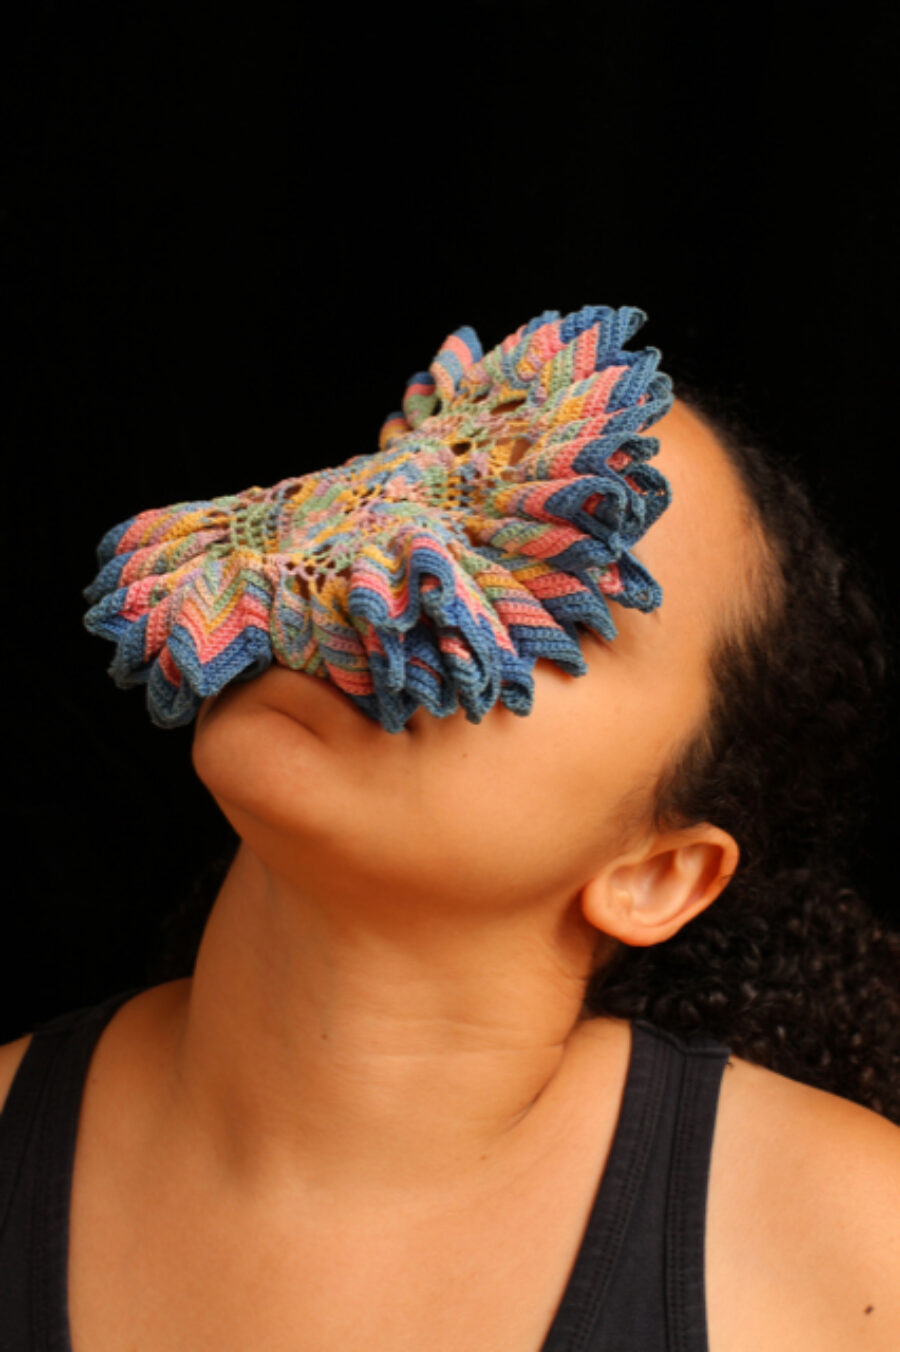 A circular, multicoloured crocheted piece sits on a person's face while they tip back their head.